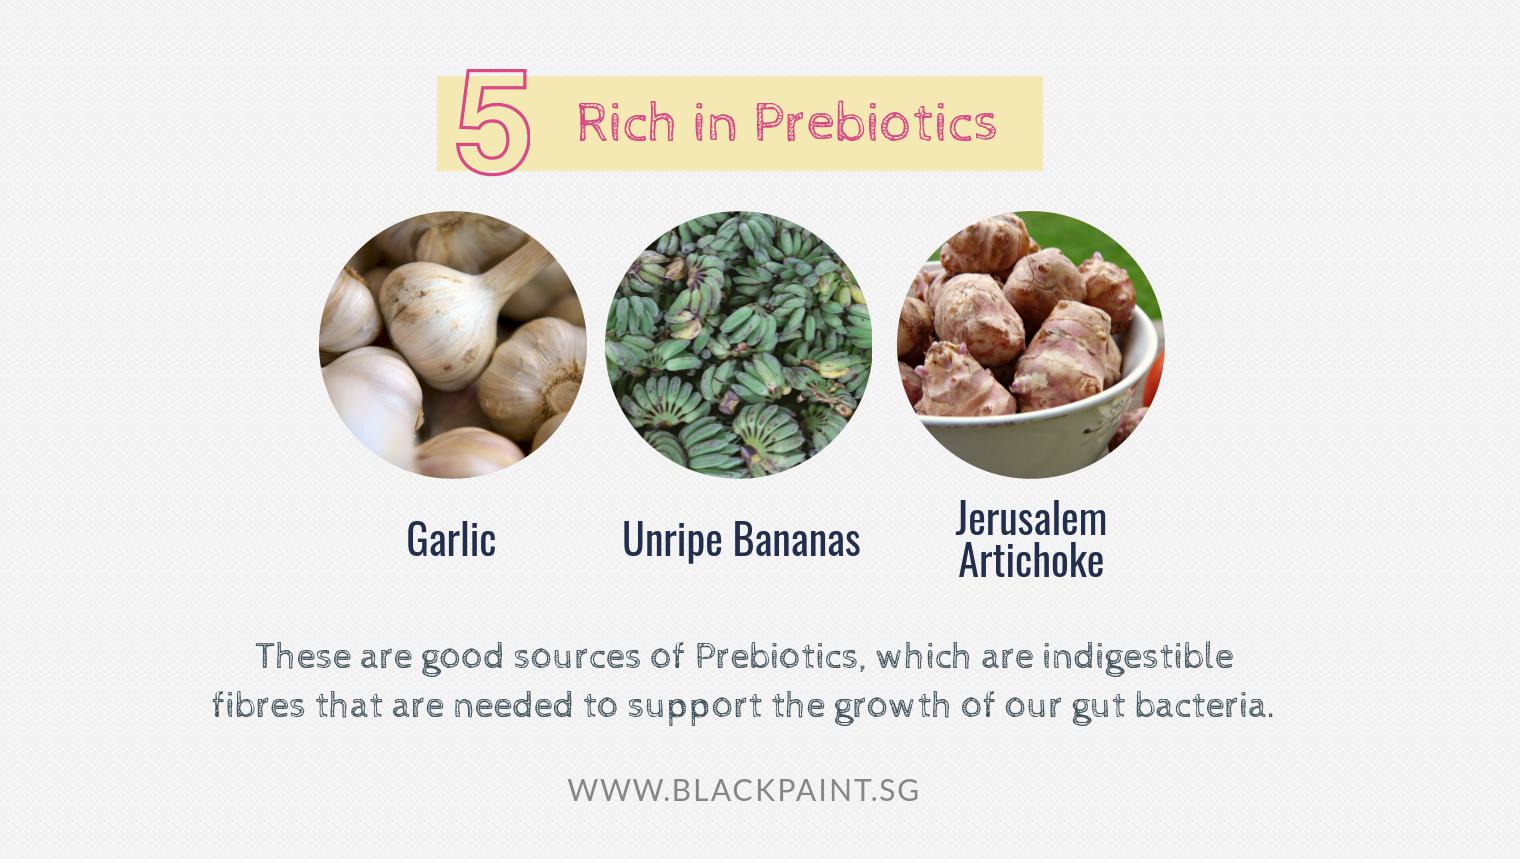 illustration of choosing foods that are rich in prebiotics